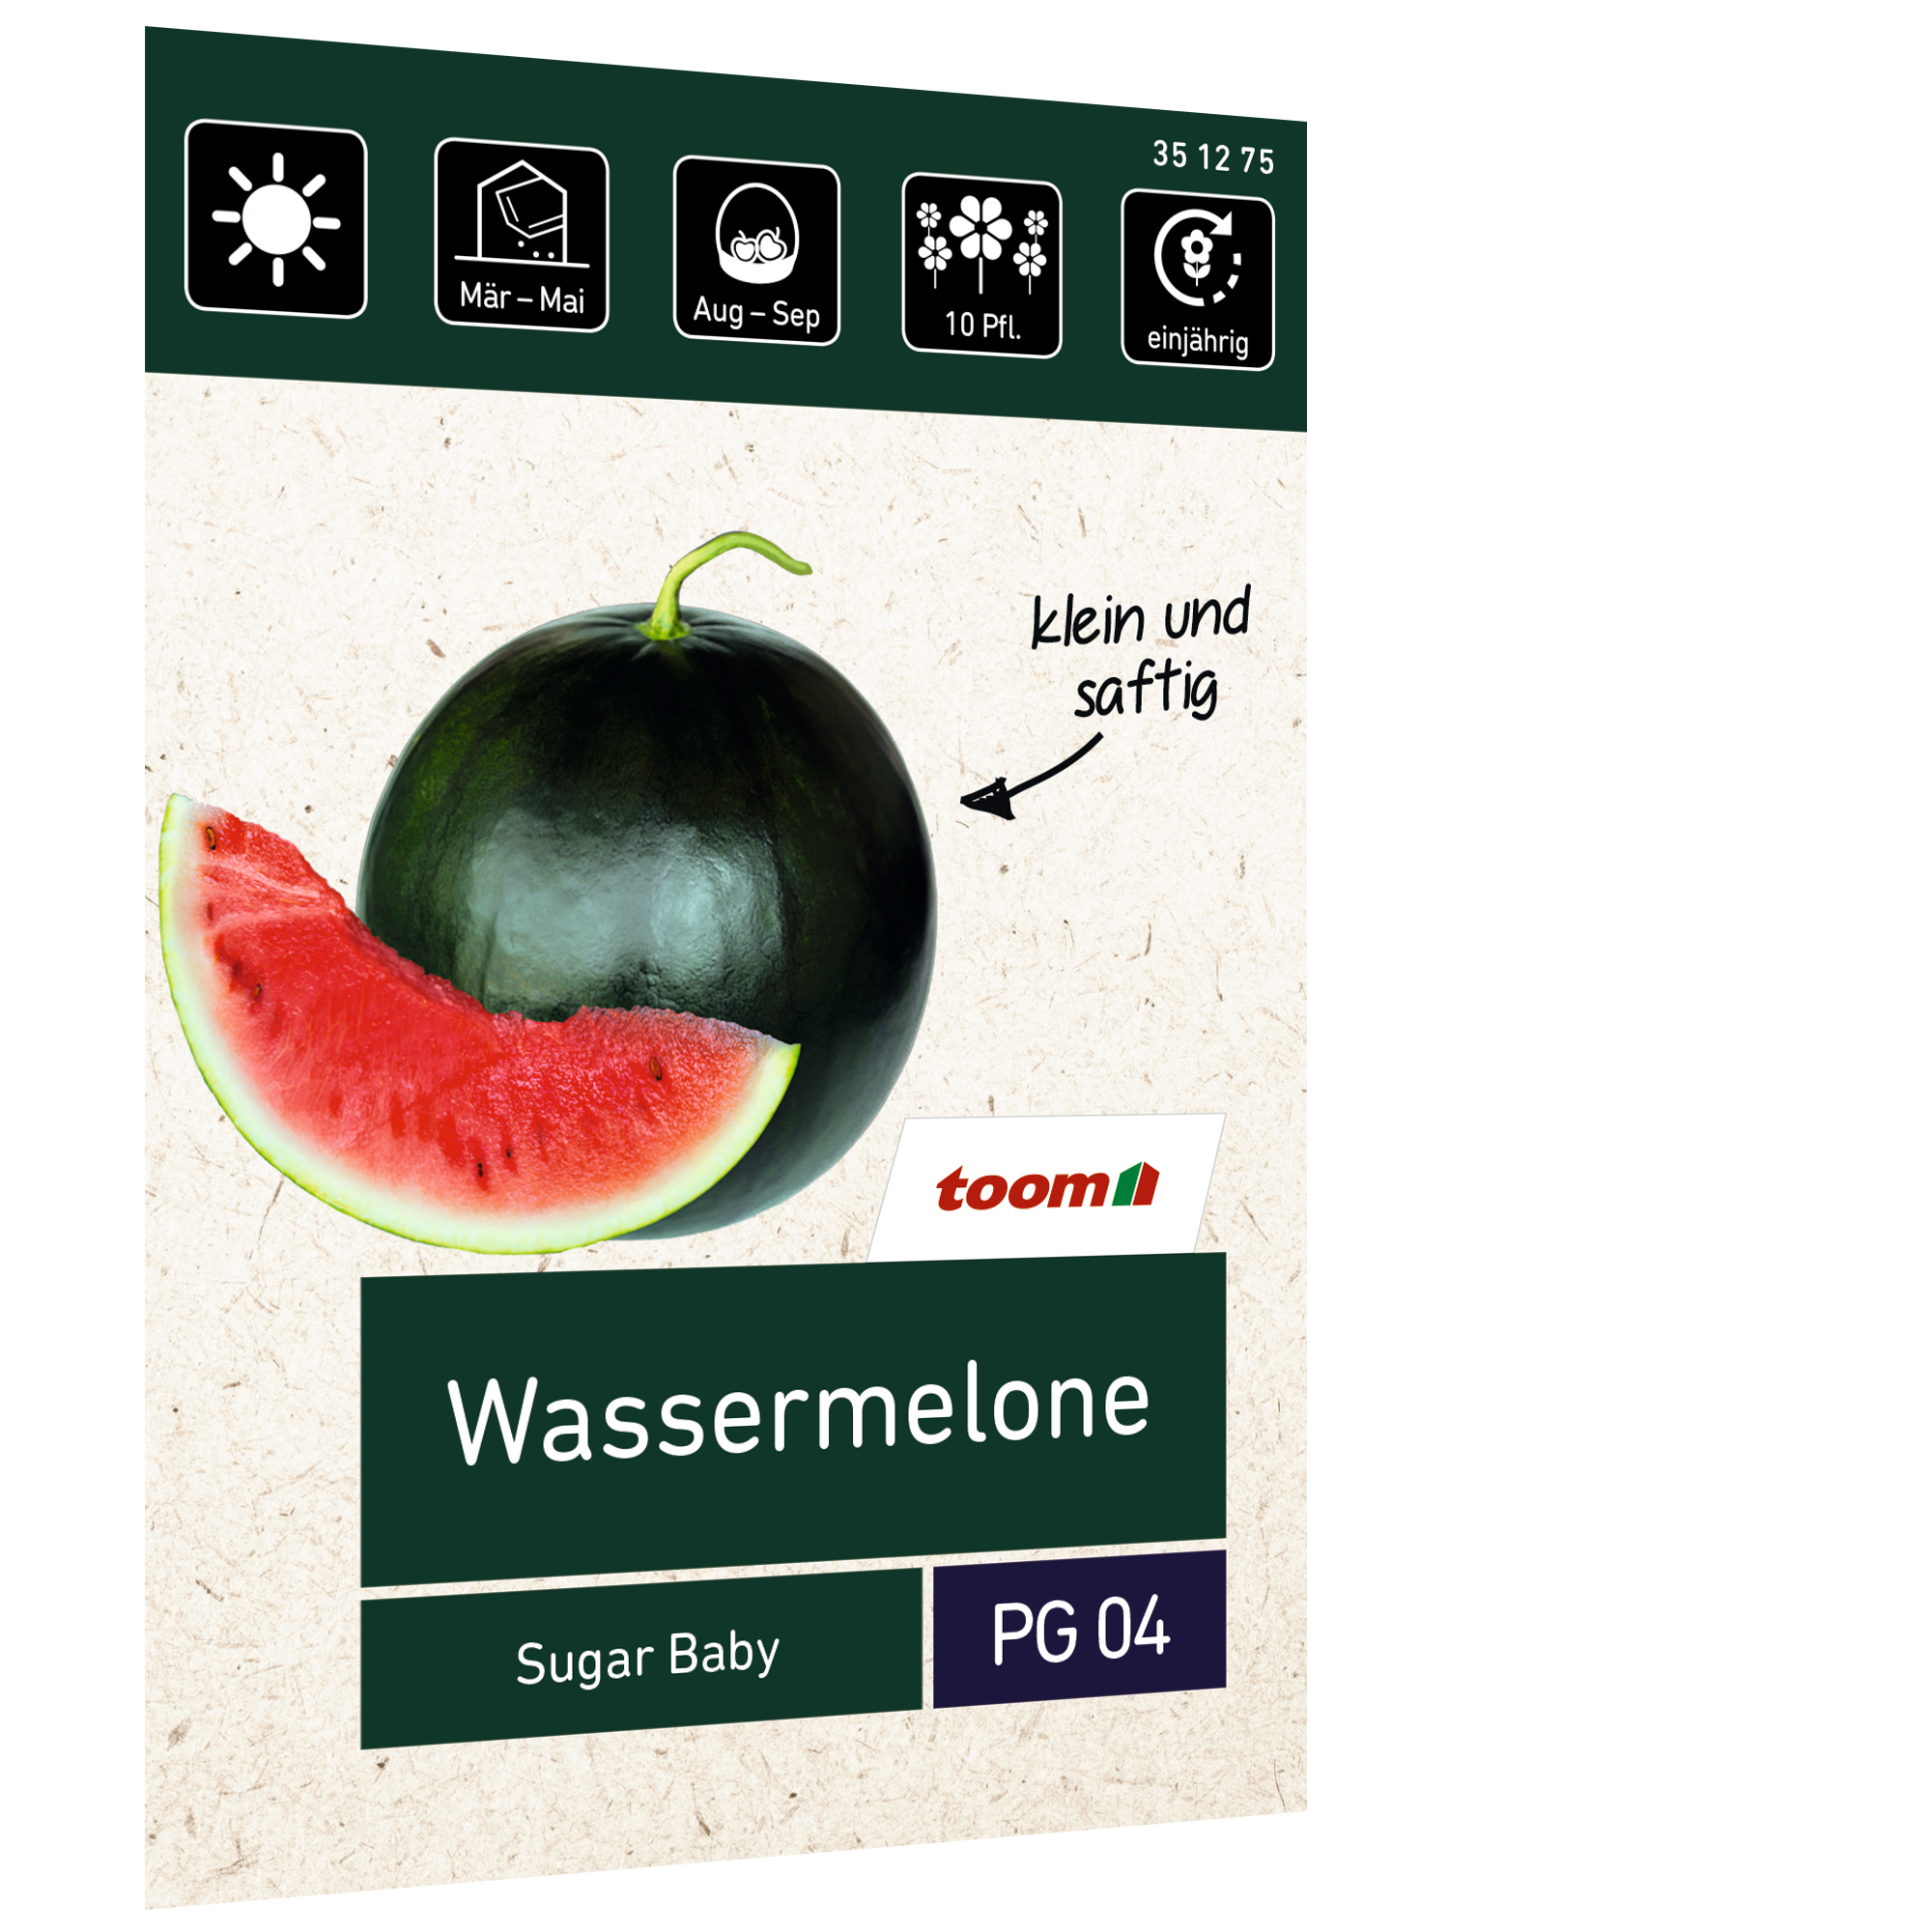 Wassermelone 'Sugar Baby' + product picture